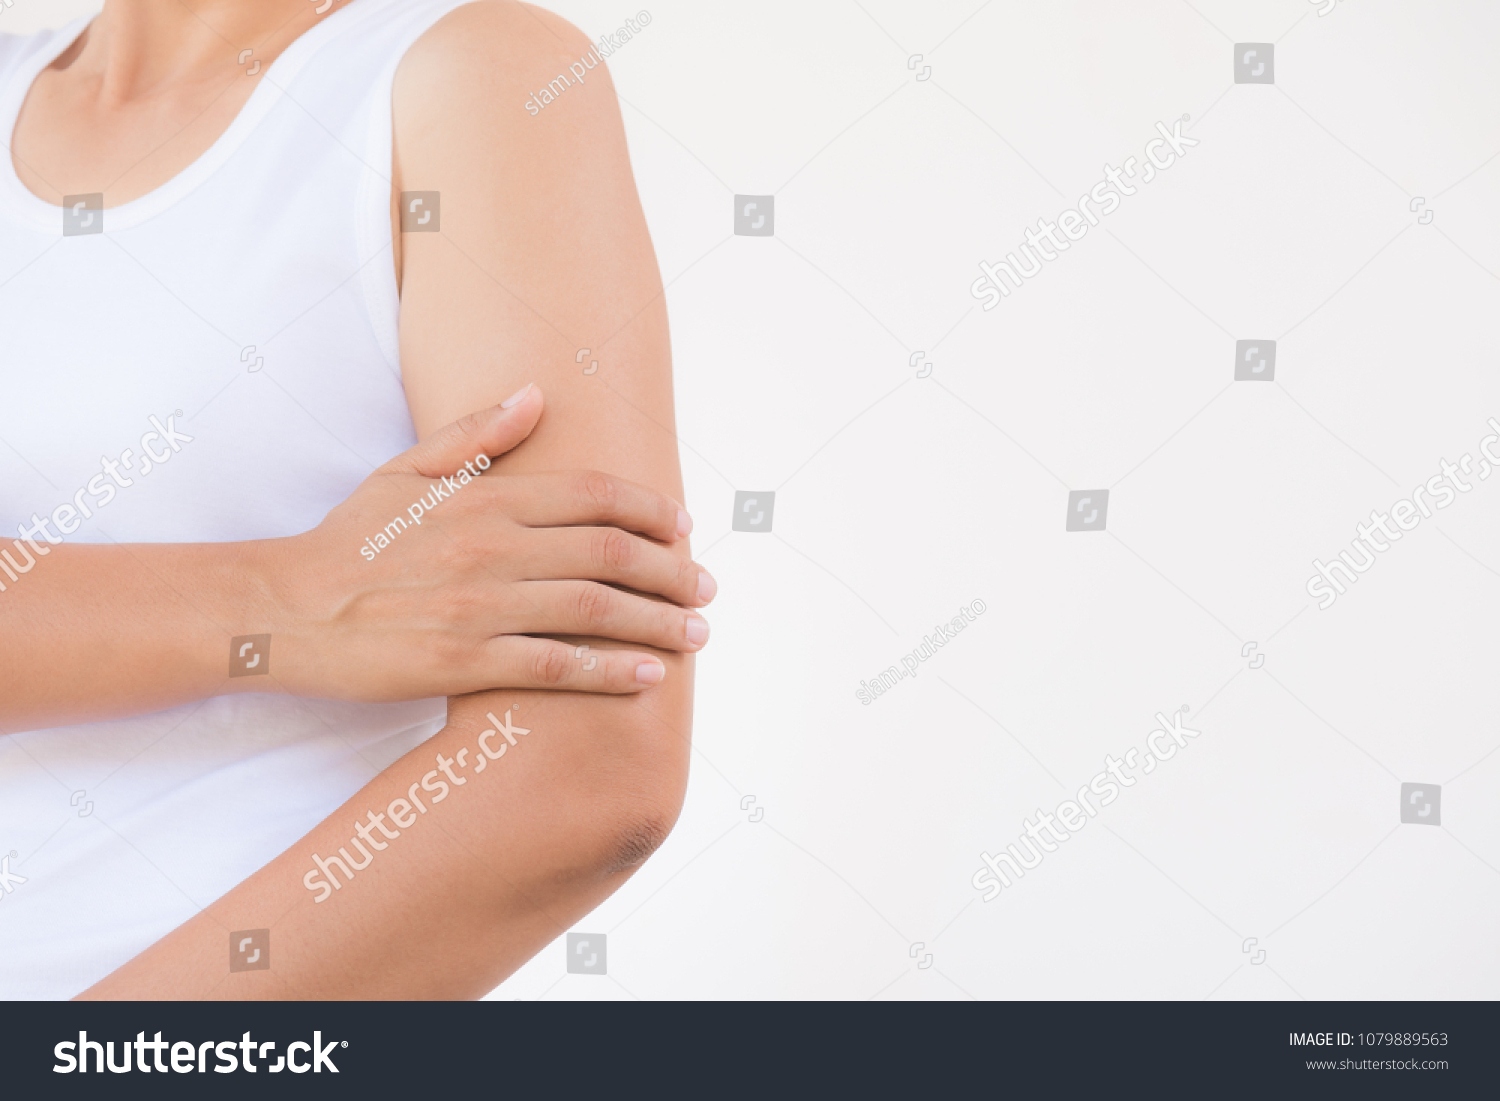 Closeup female's arm. Arm pain and injury. Health care and medical concept. #1079889563